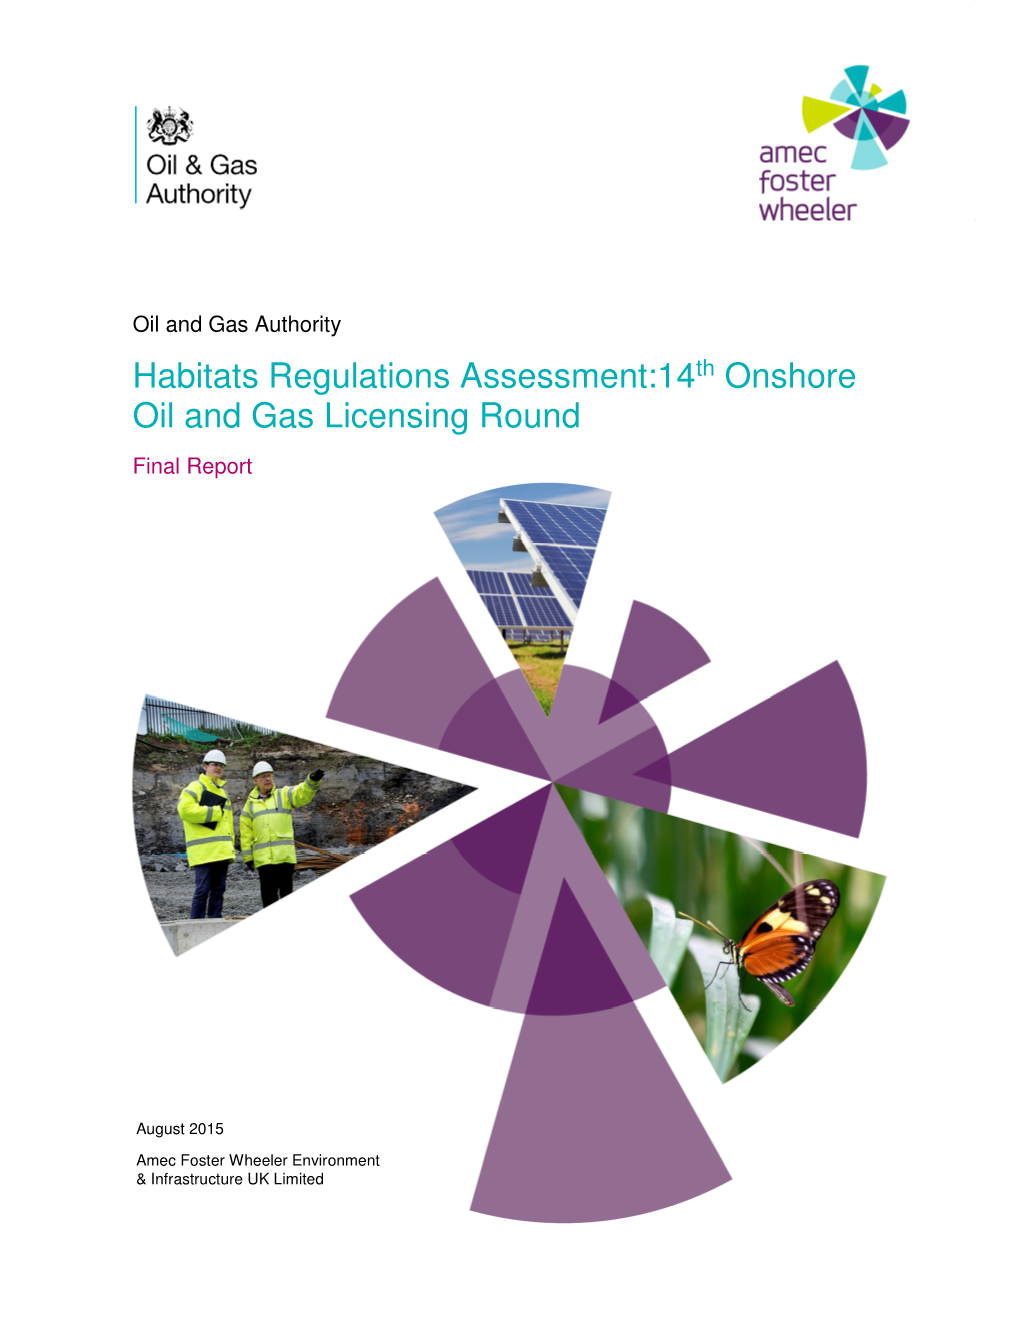 Habitats Regulations Assessment:14Th Onshore Oil and Gas Licensing Round Final Report